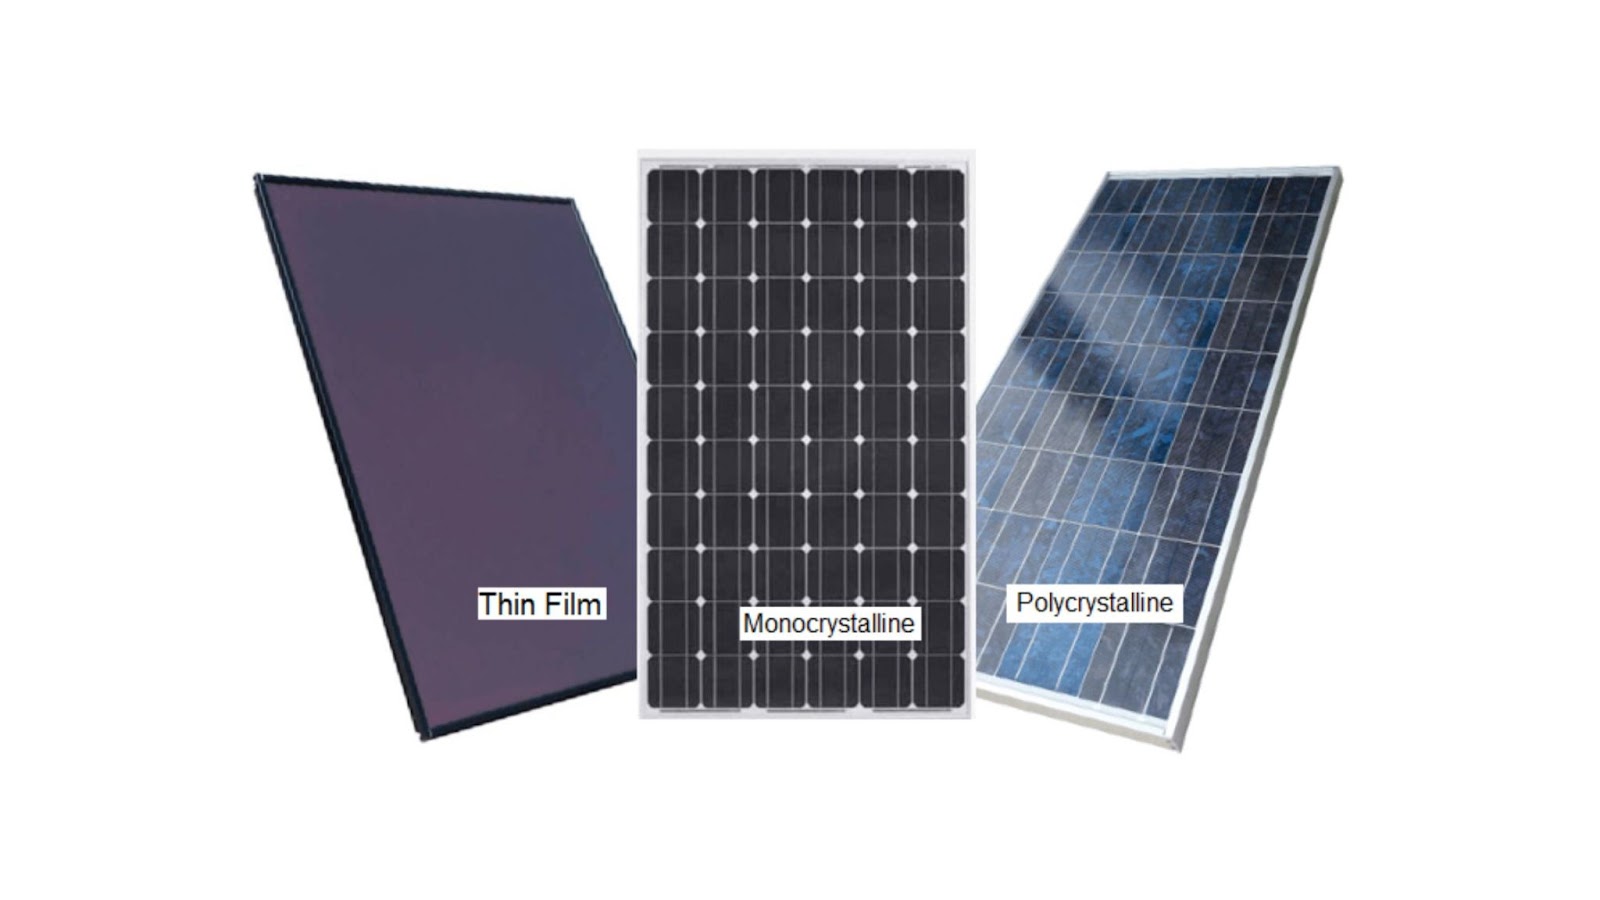 But with so many different types of solar panels available, it can be tough to know which ones are right for you